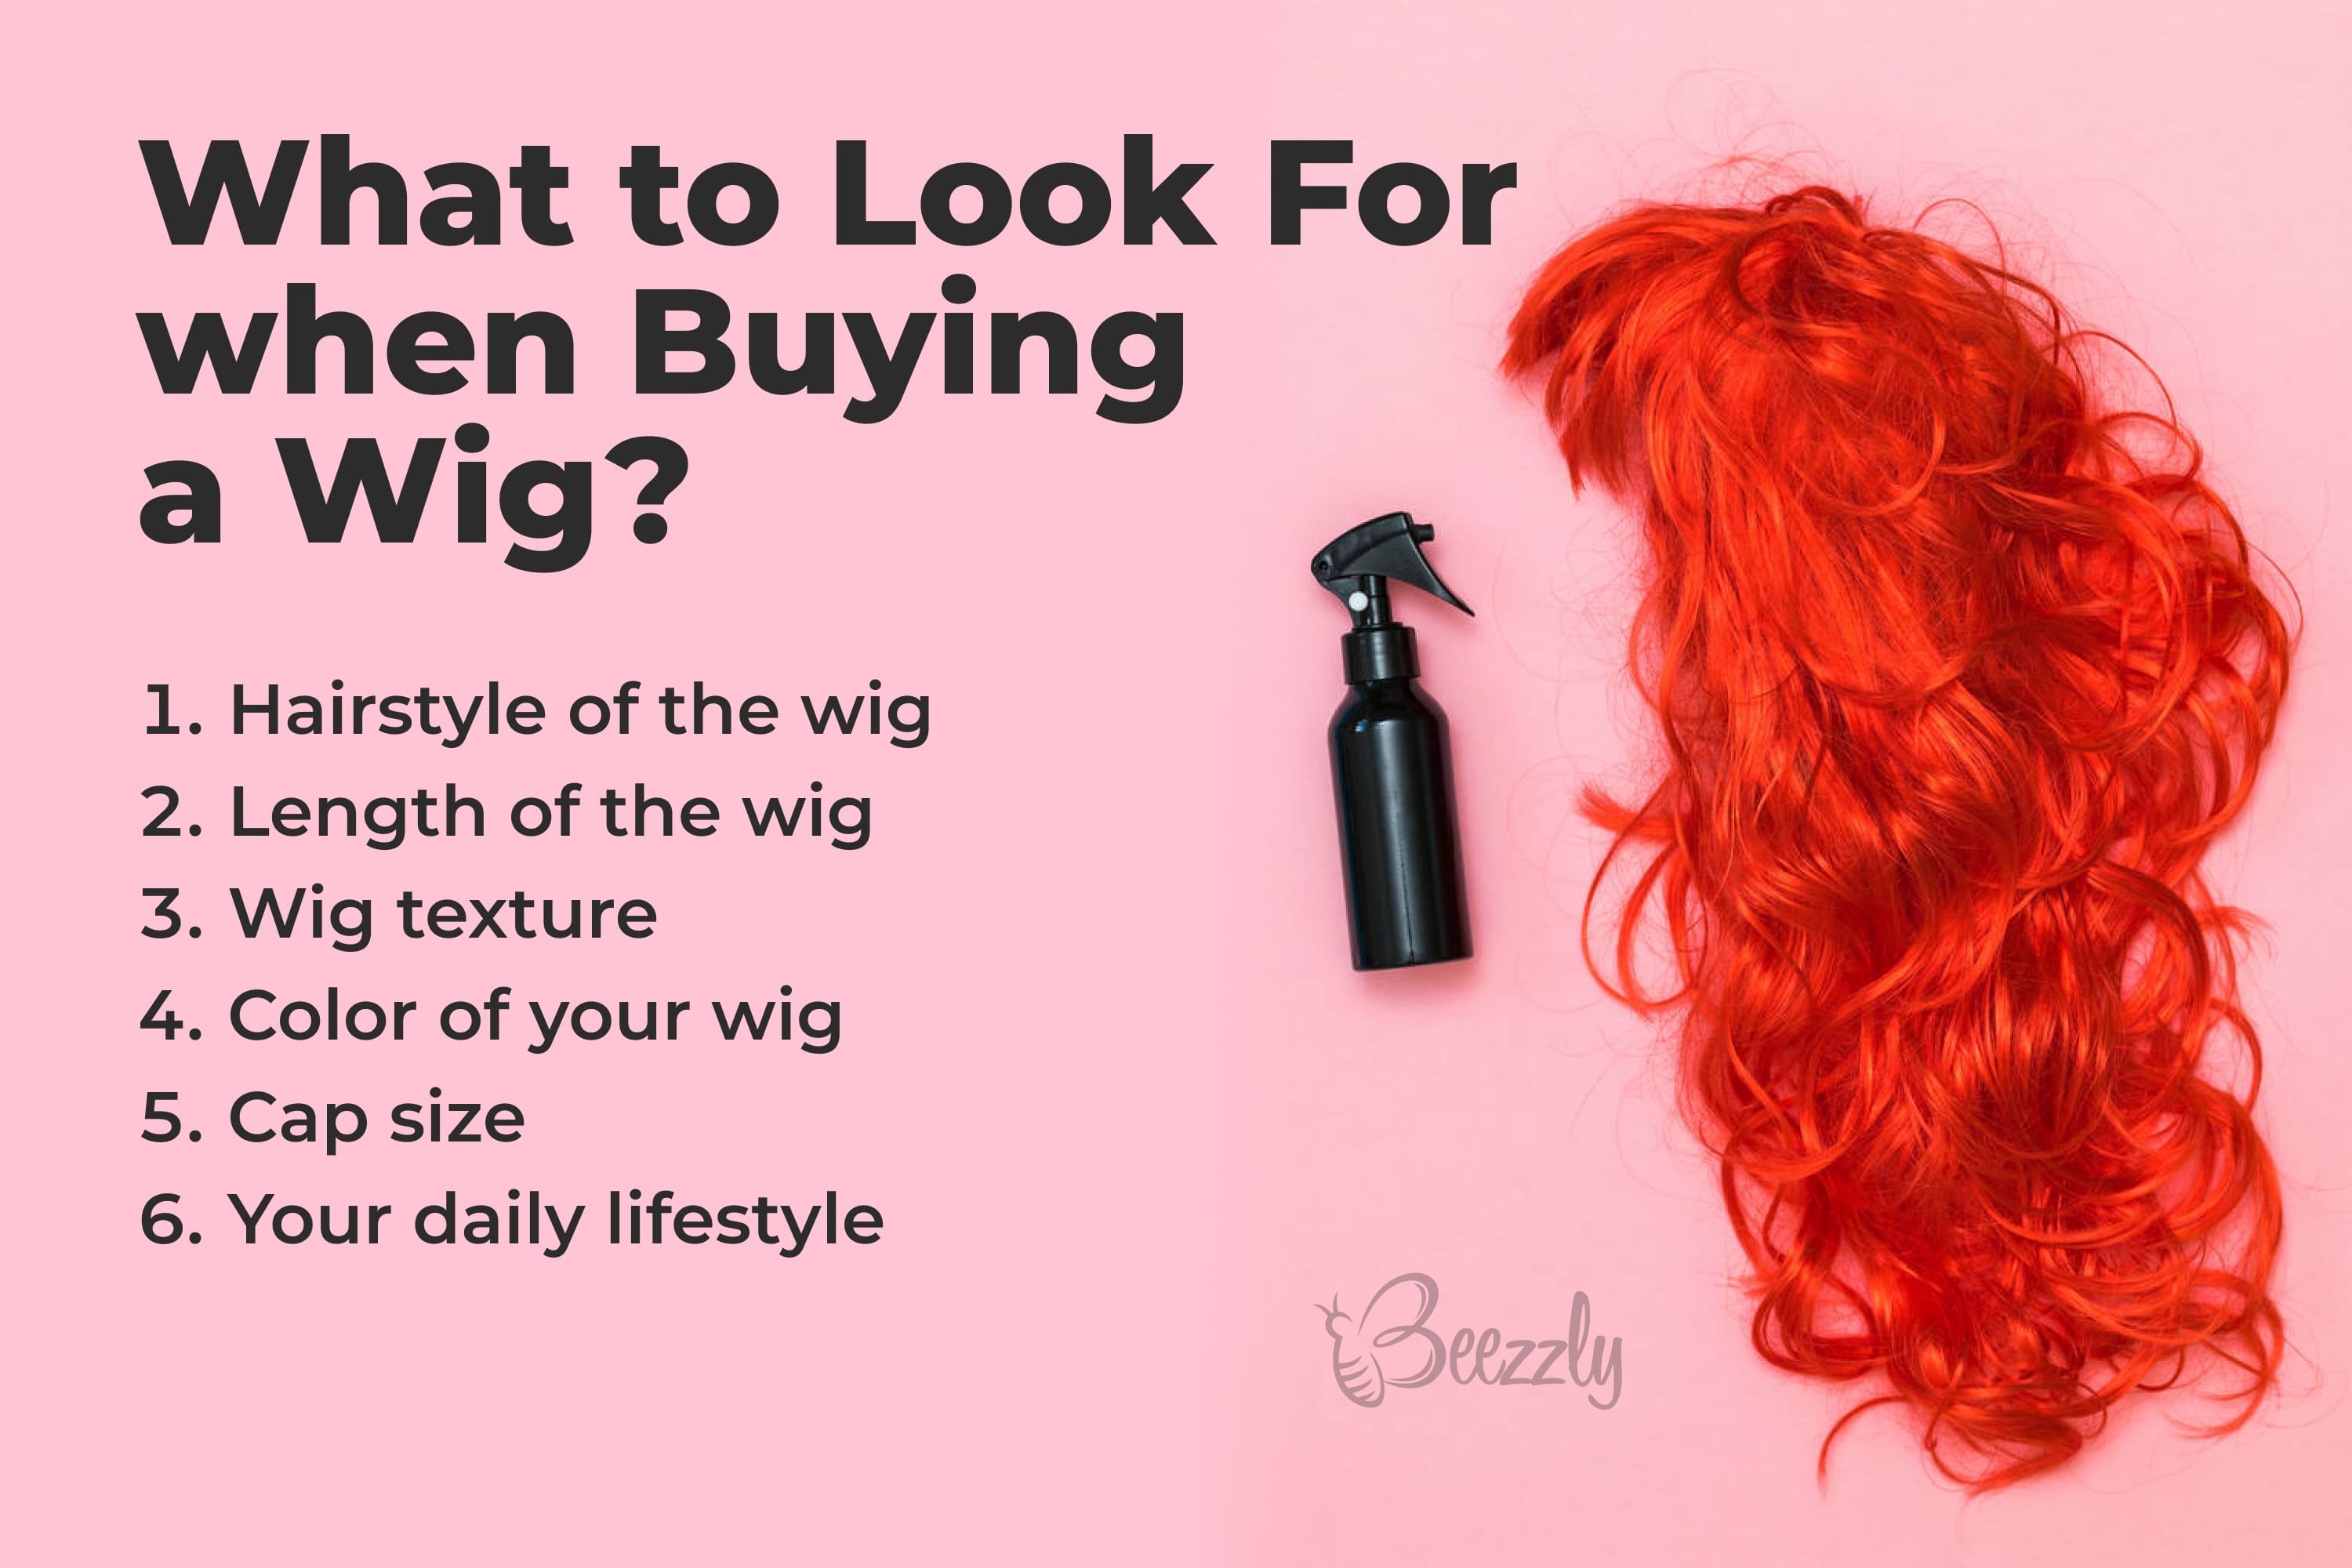 What to look for when buying a wig